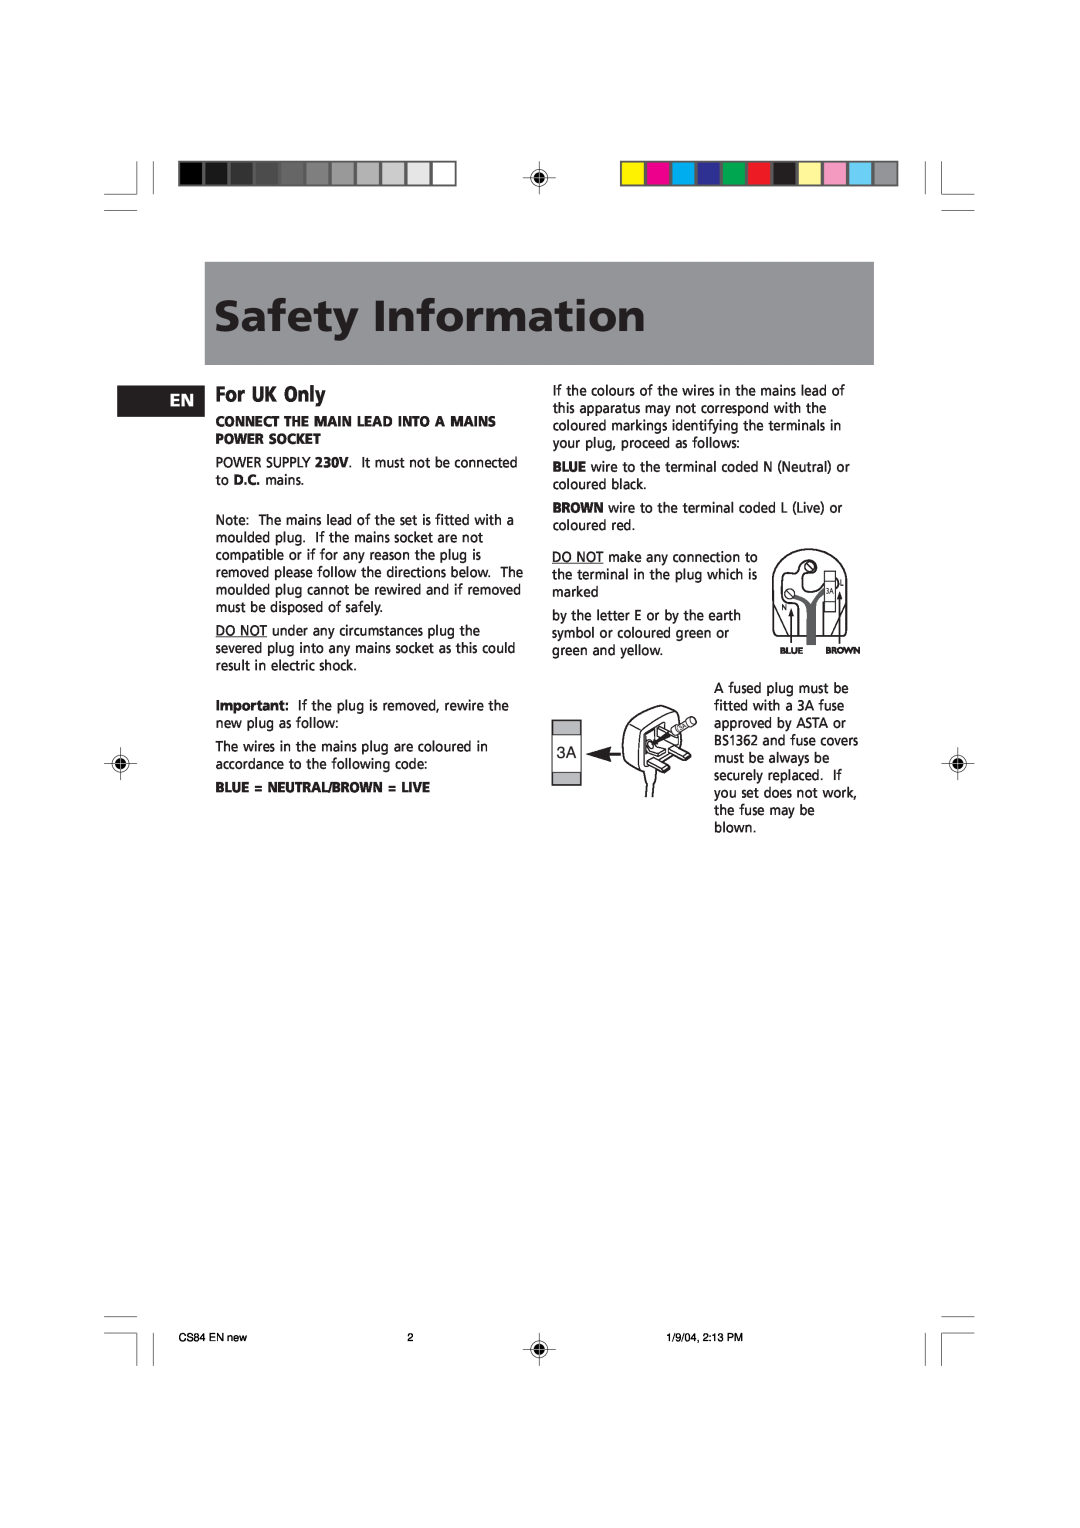 Technicolor - Thomson CS84 manual Safety Information, For UK Only, Connect The Main Lead Into A Mains Power Socket 